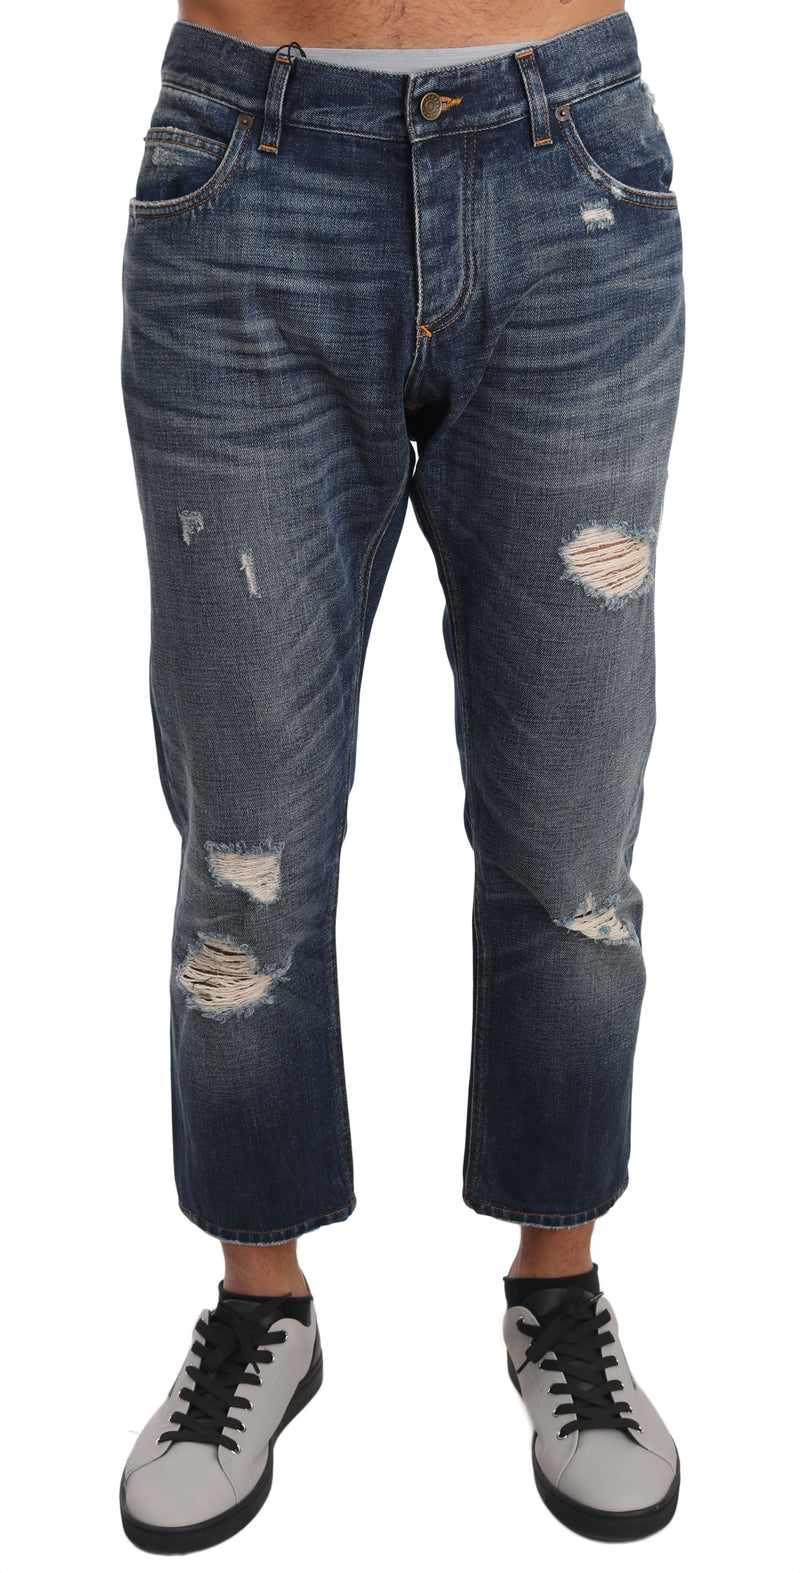 Blue Cotton Ripped Jeans Cropped Pants